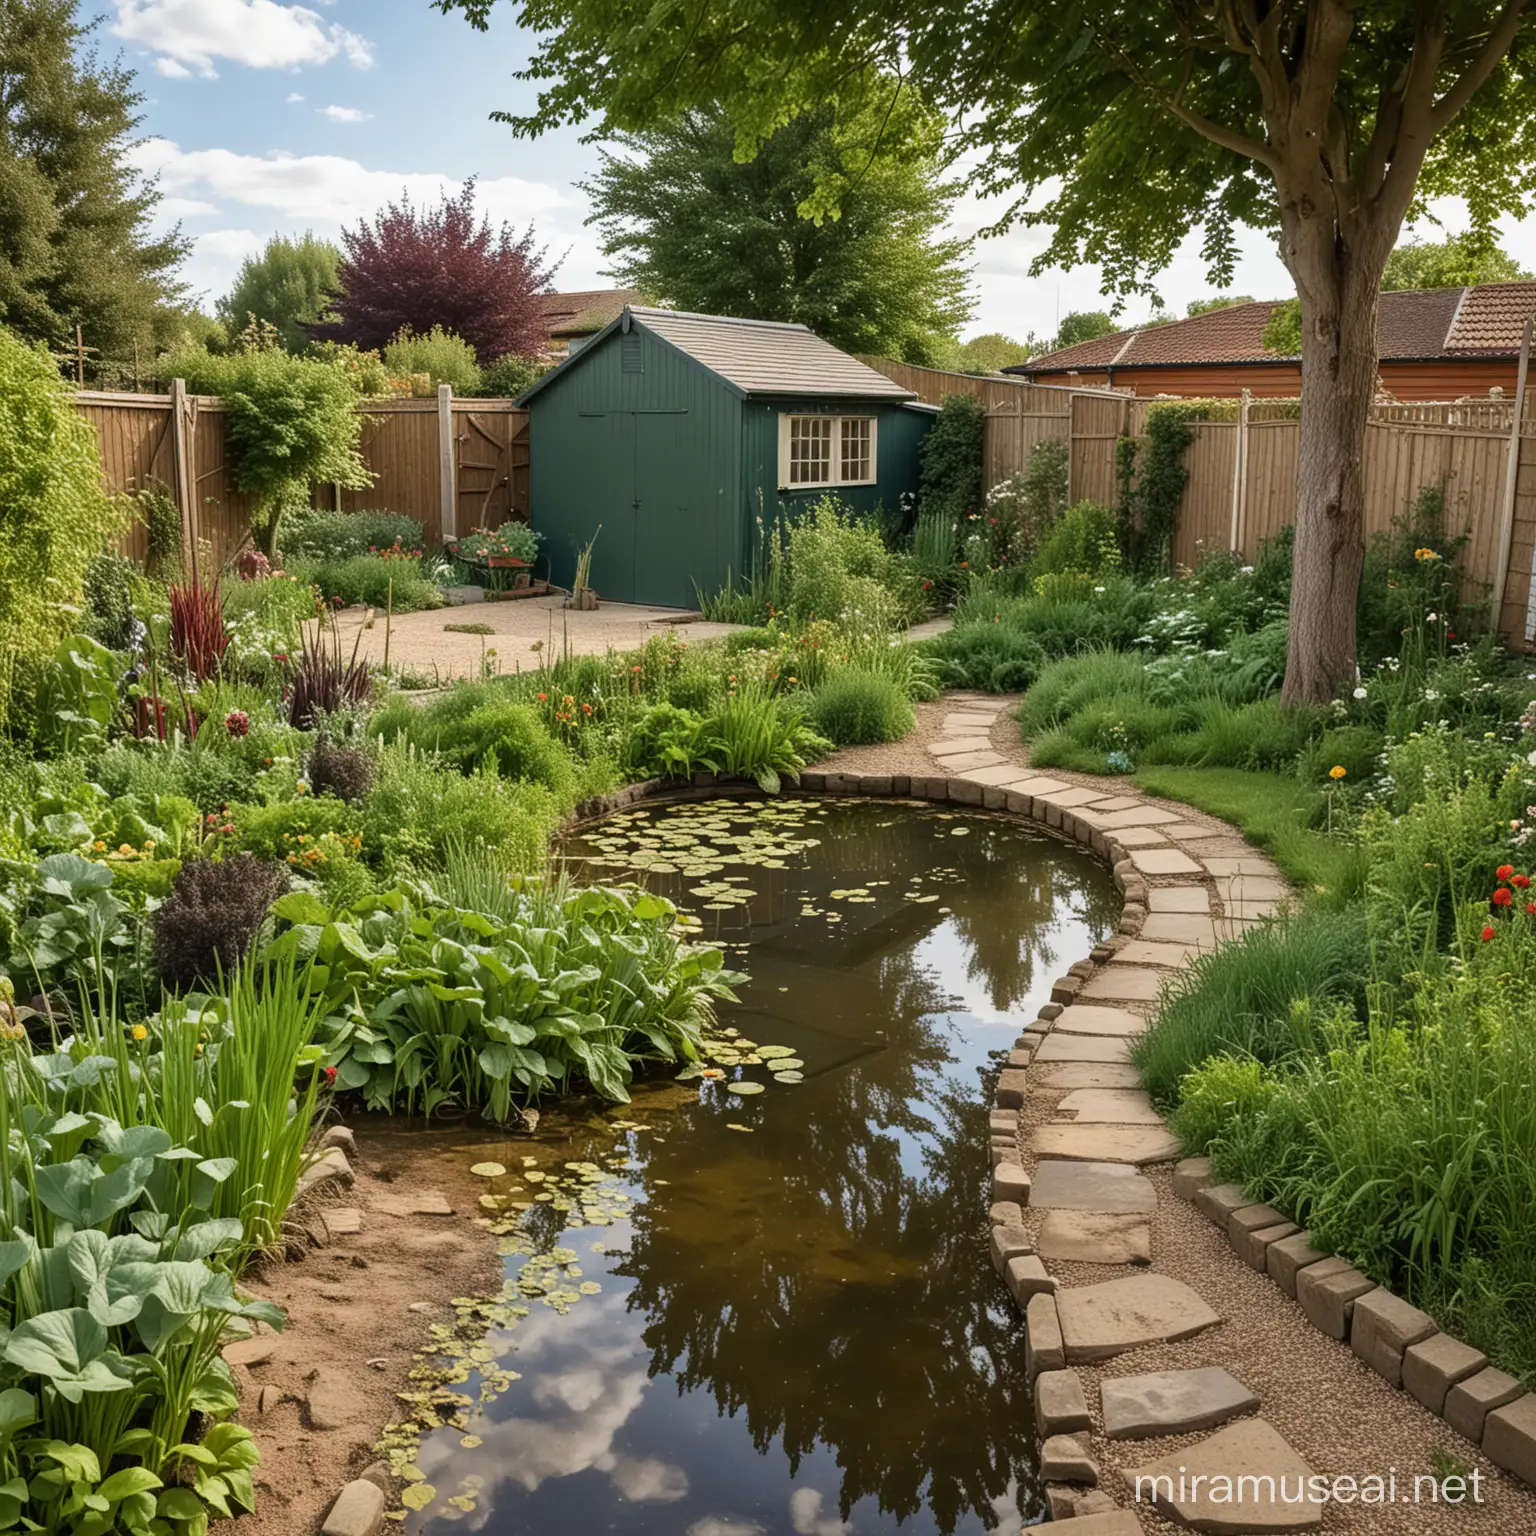 Tranquil Garden Scene with Pond Path and Shed